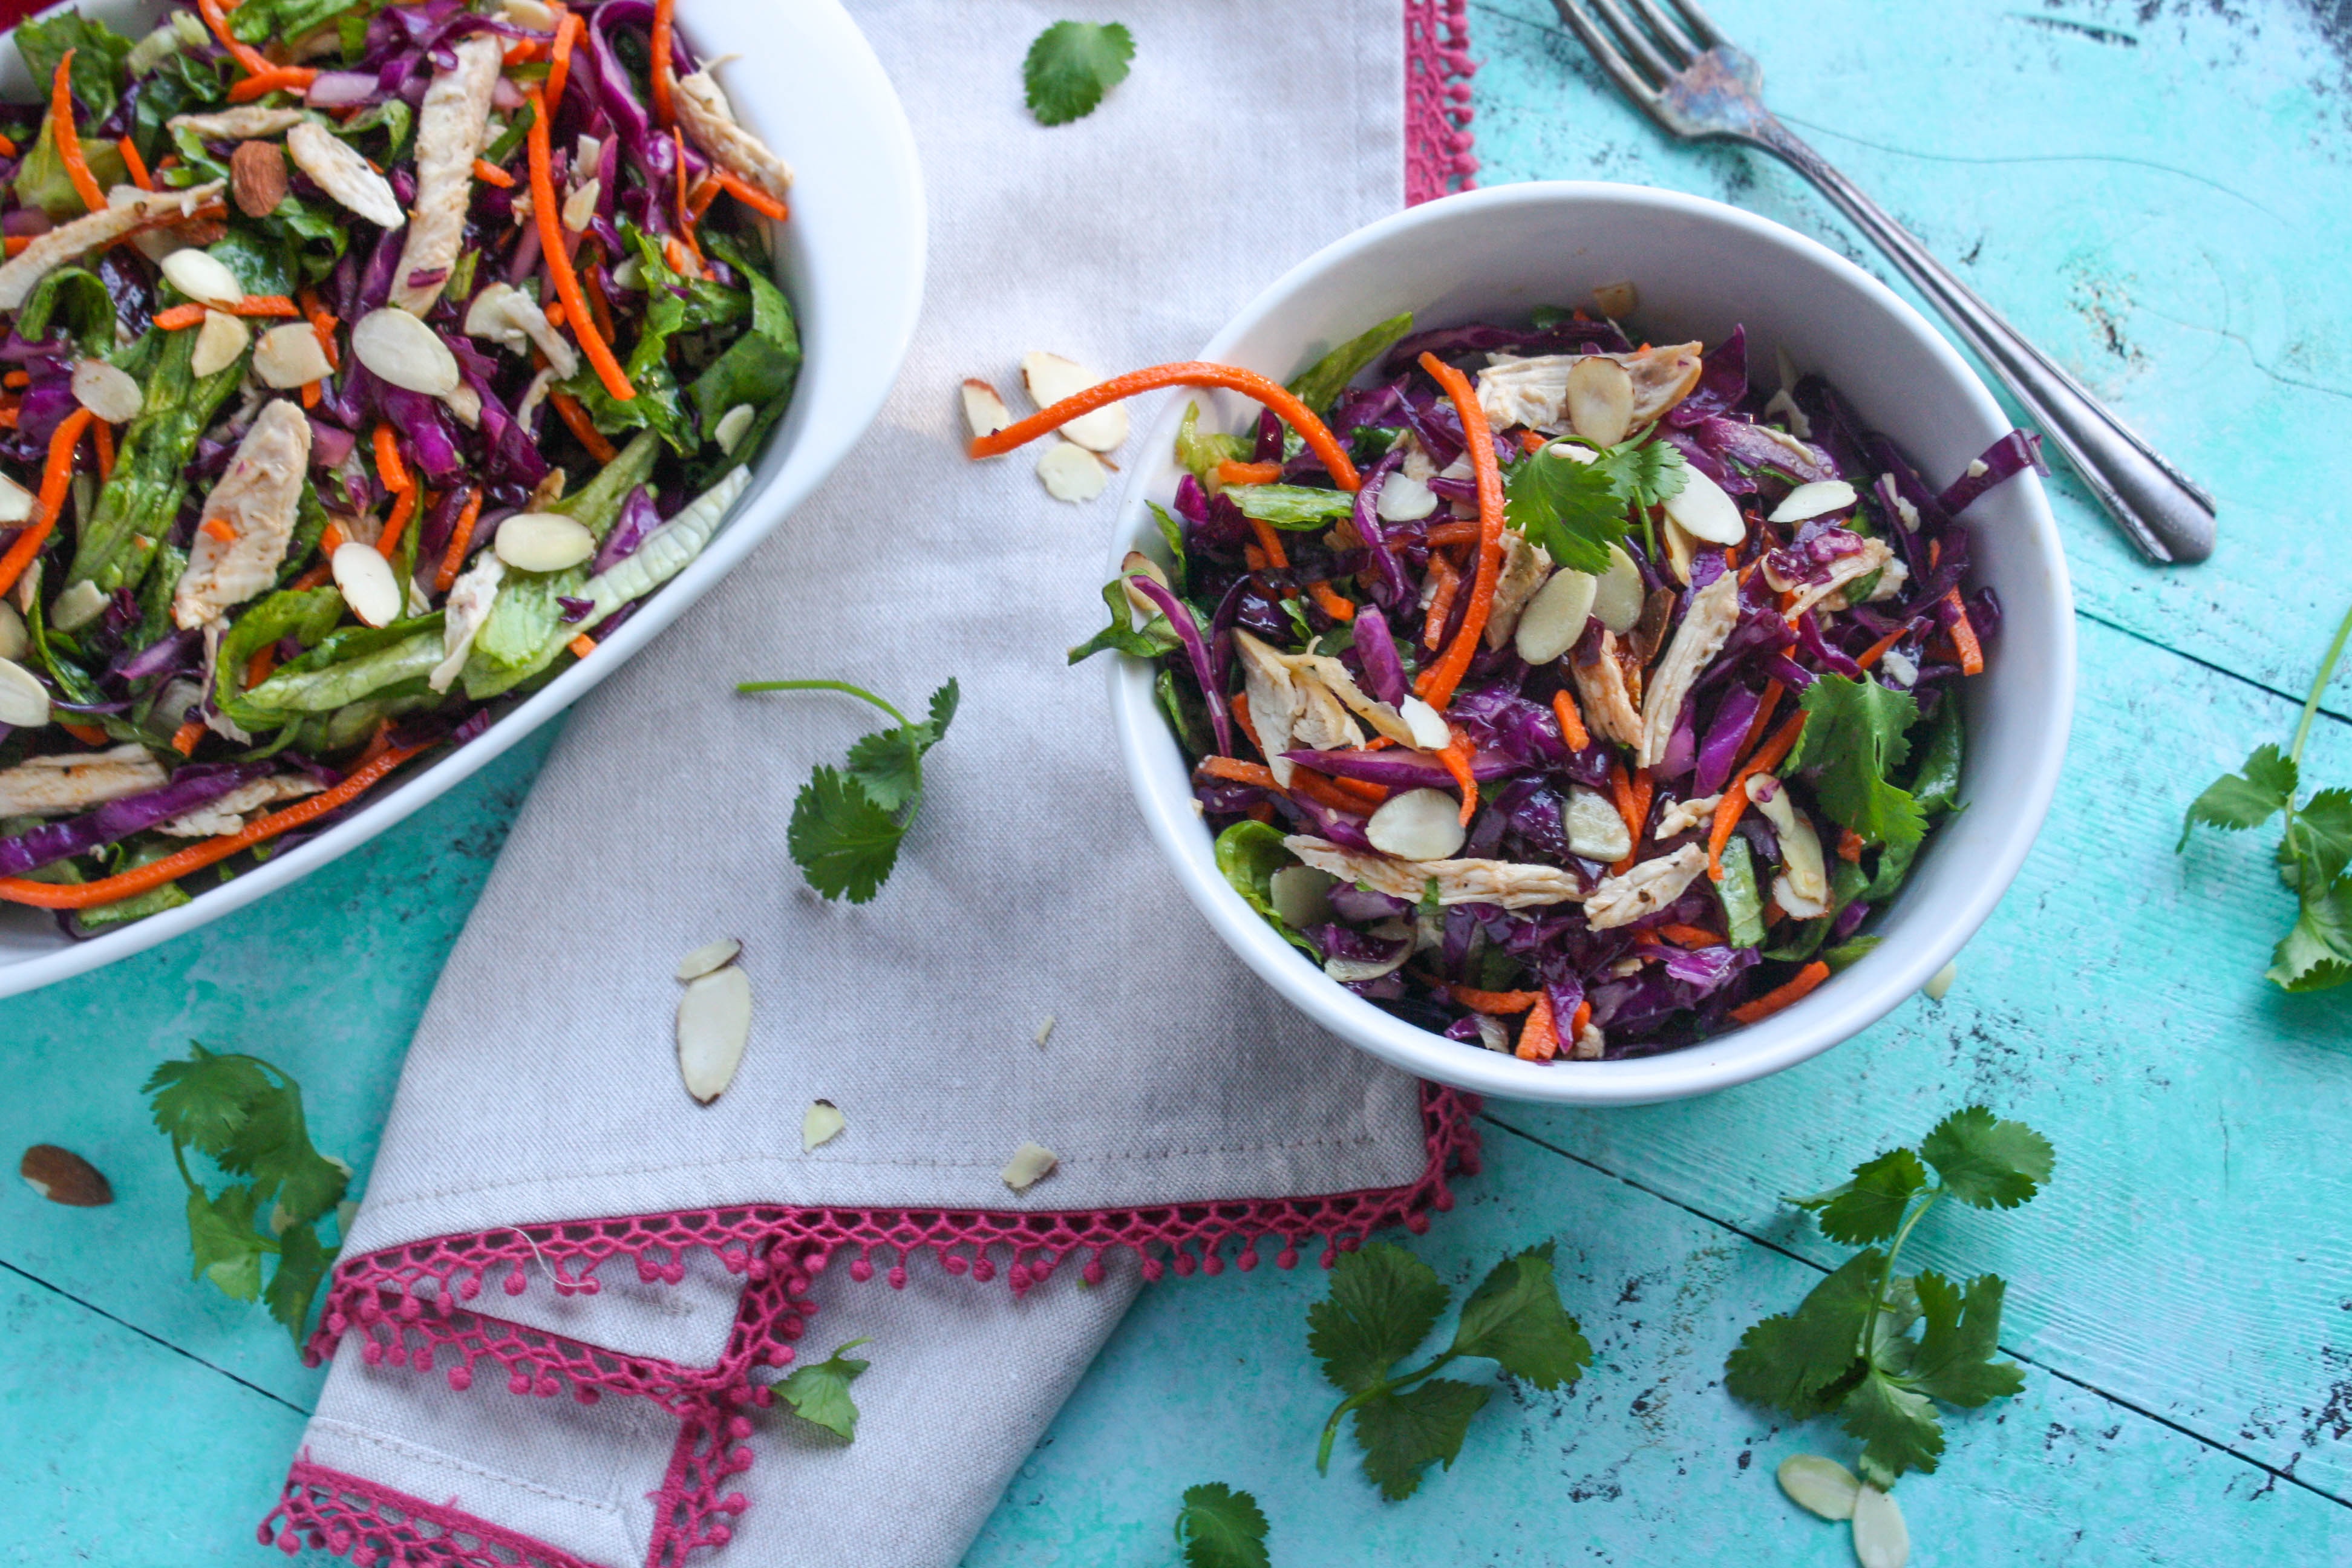 Crunchy Cabbage & Chicken Salad with Sesame Dressing is full of flavor...and crunch! You'll love this tasty and colorful cabbage salad!